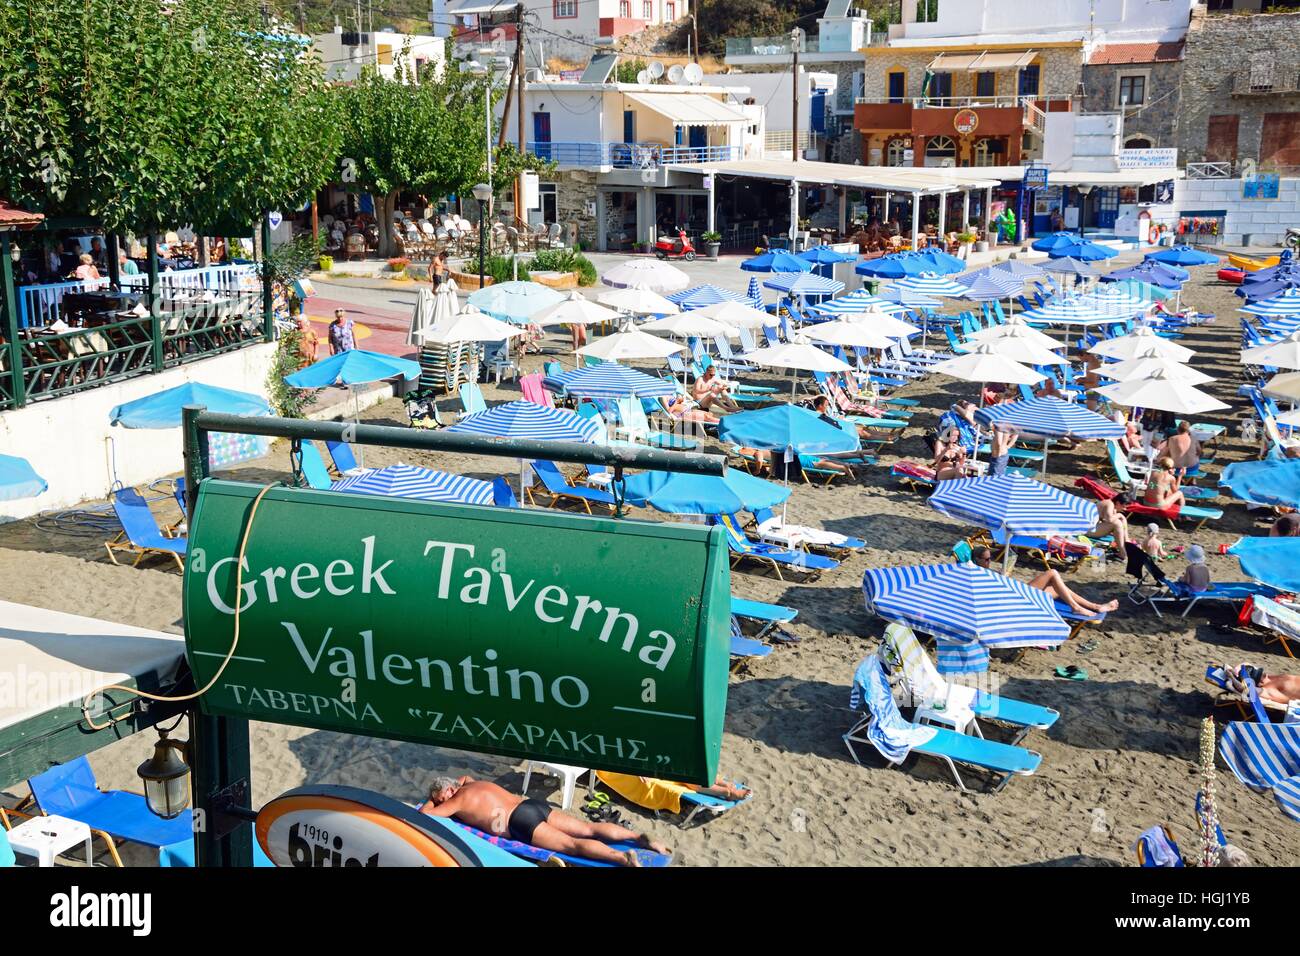 Taverna On The Beach High Resolution Stock Photography and Images - Alamy